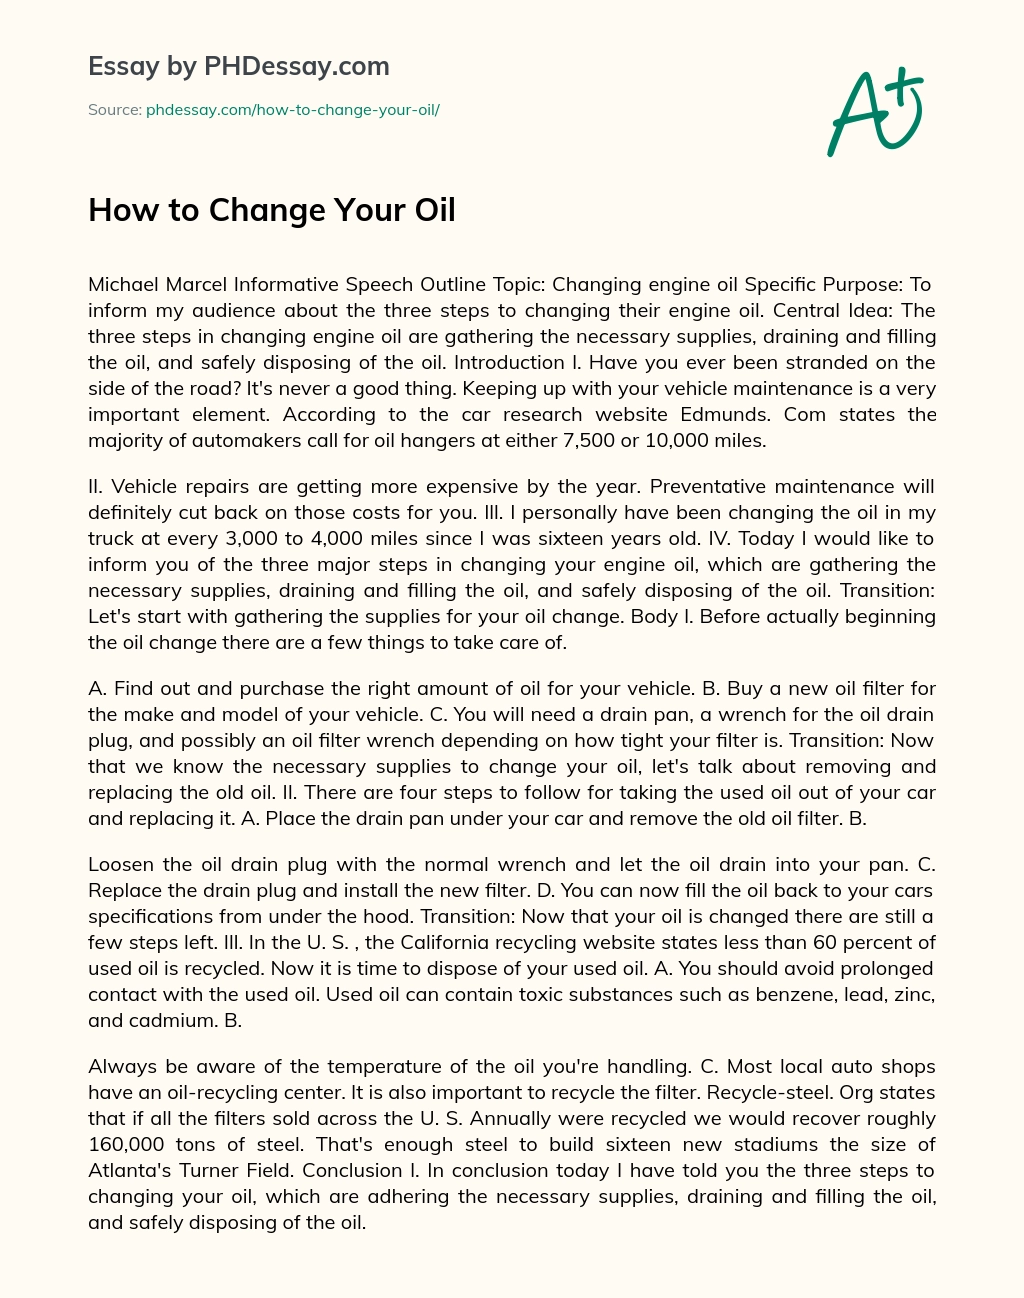 How to Change Your Oil essay